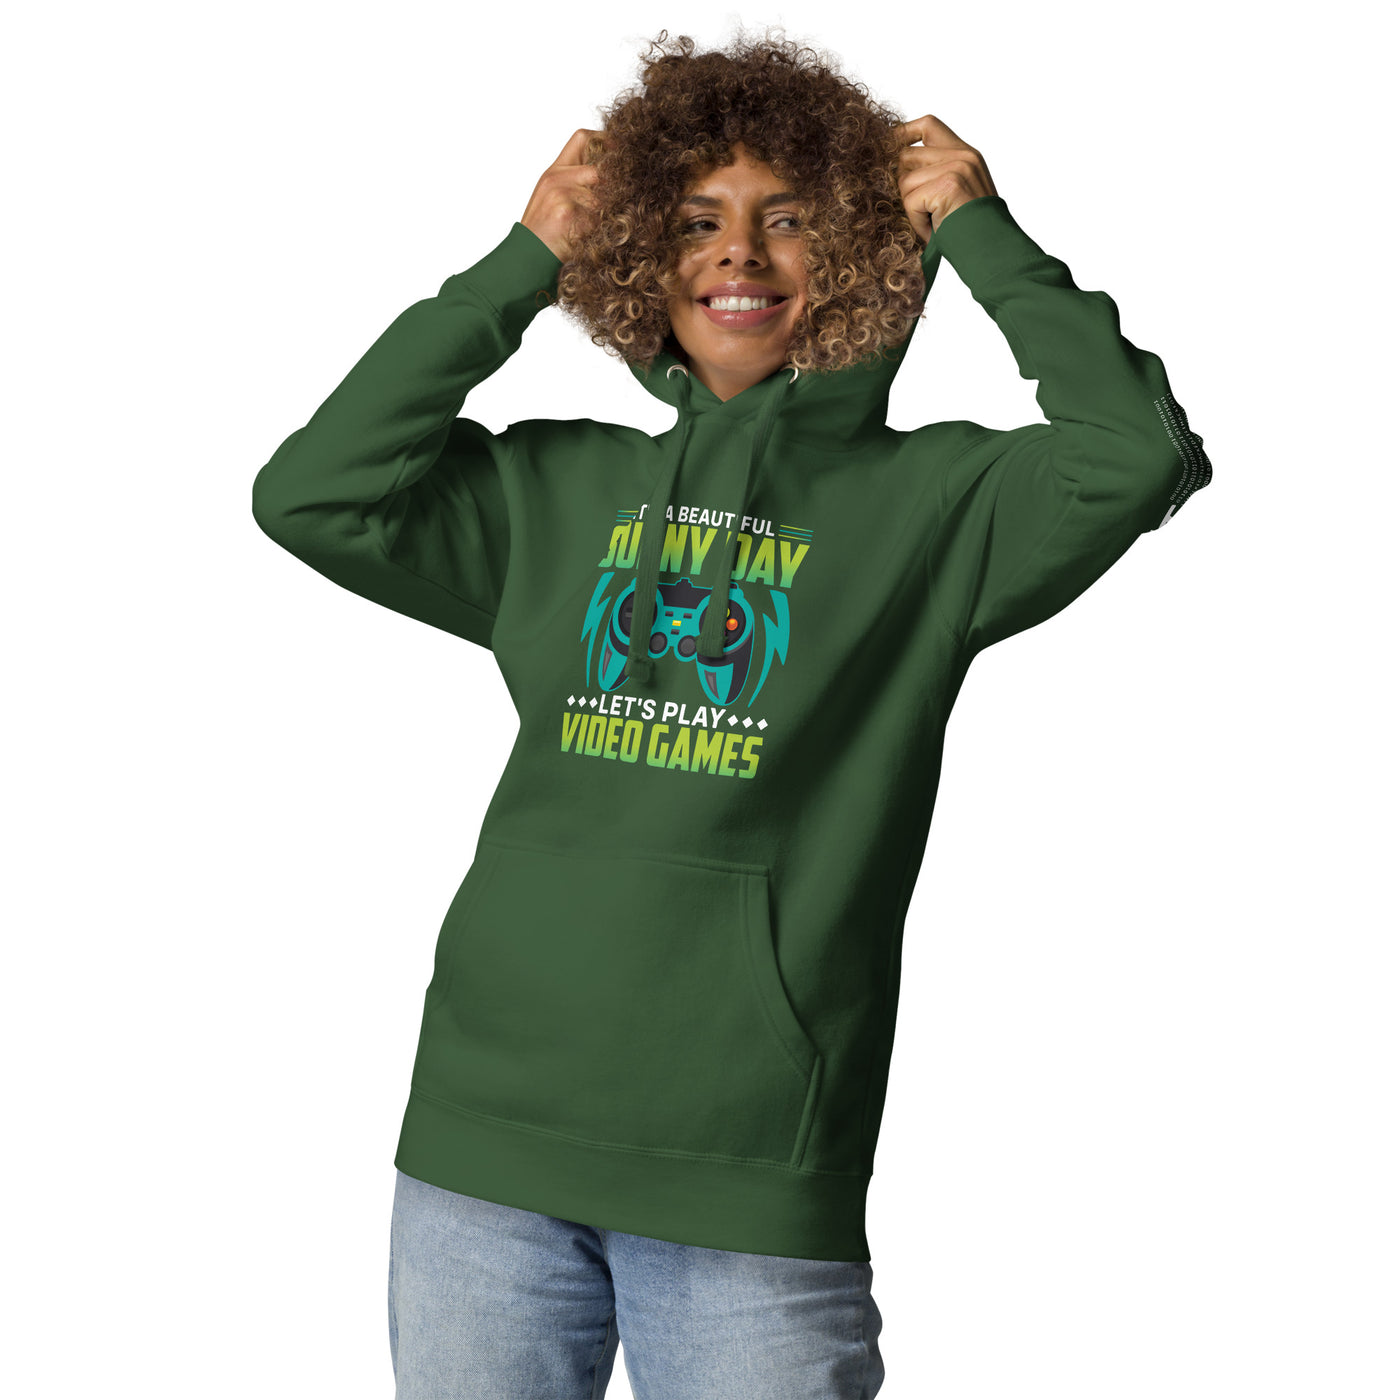 It is a Beautiful Sunny Day; Let's Play Video Games - Unisex Hoodie